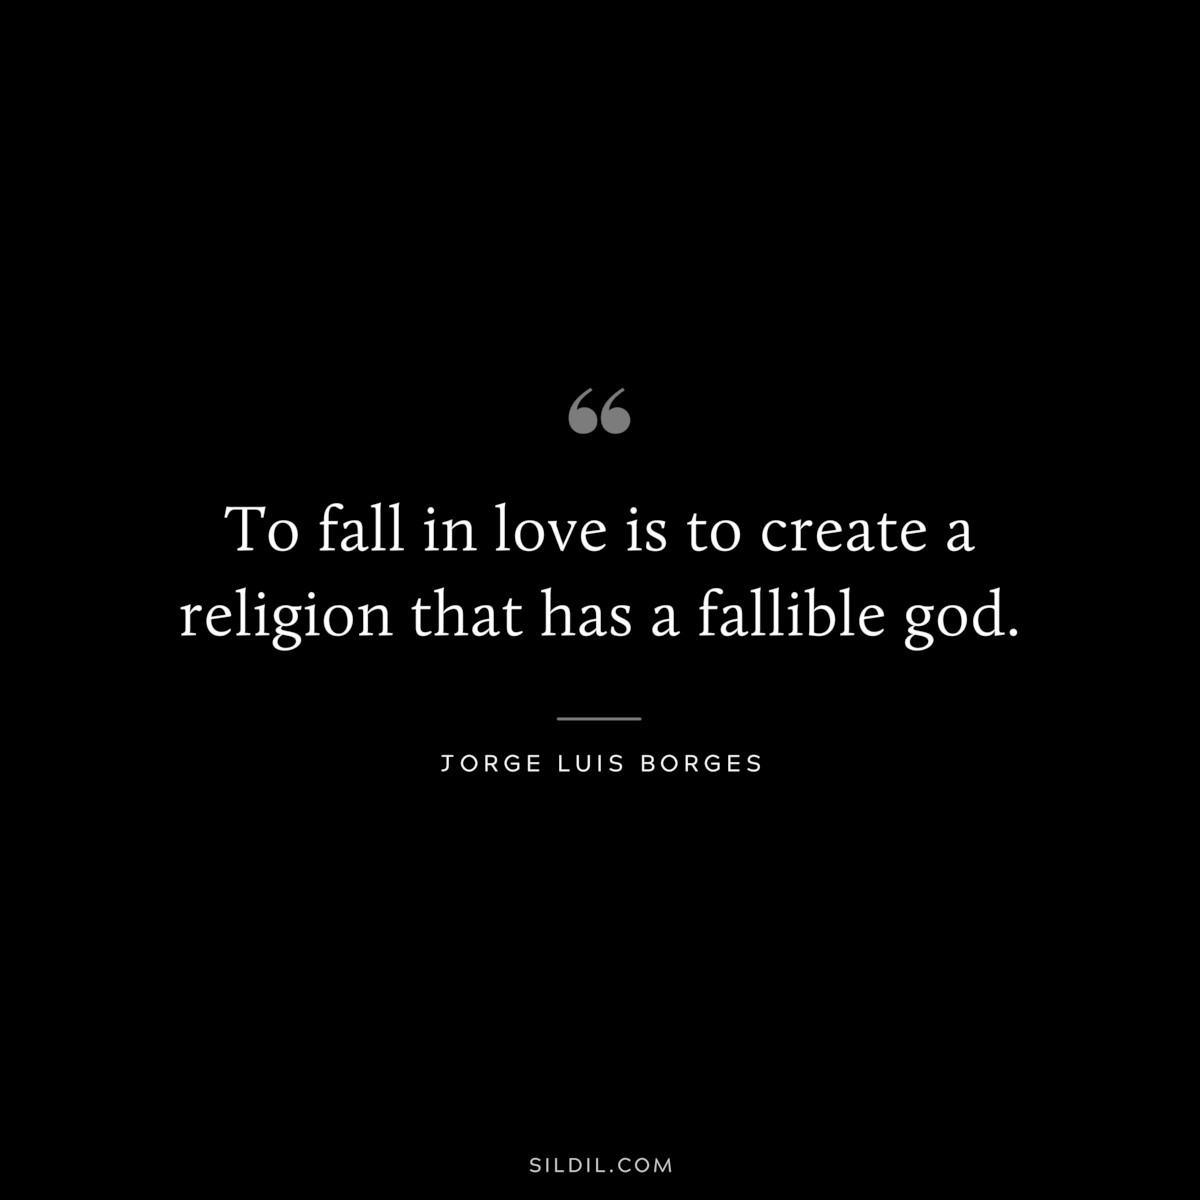 To fall in love is to create a religion that has a fallible god. ― Jorge Luis Borges